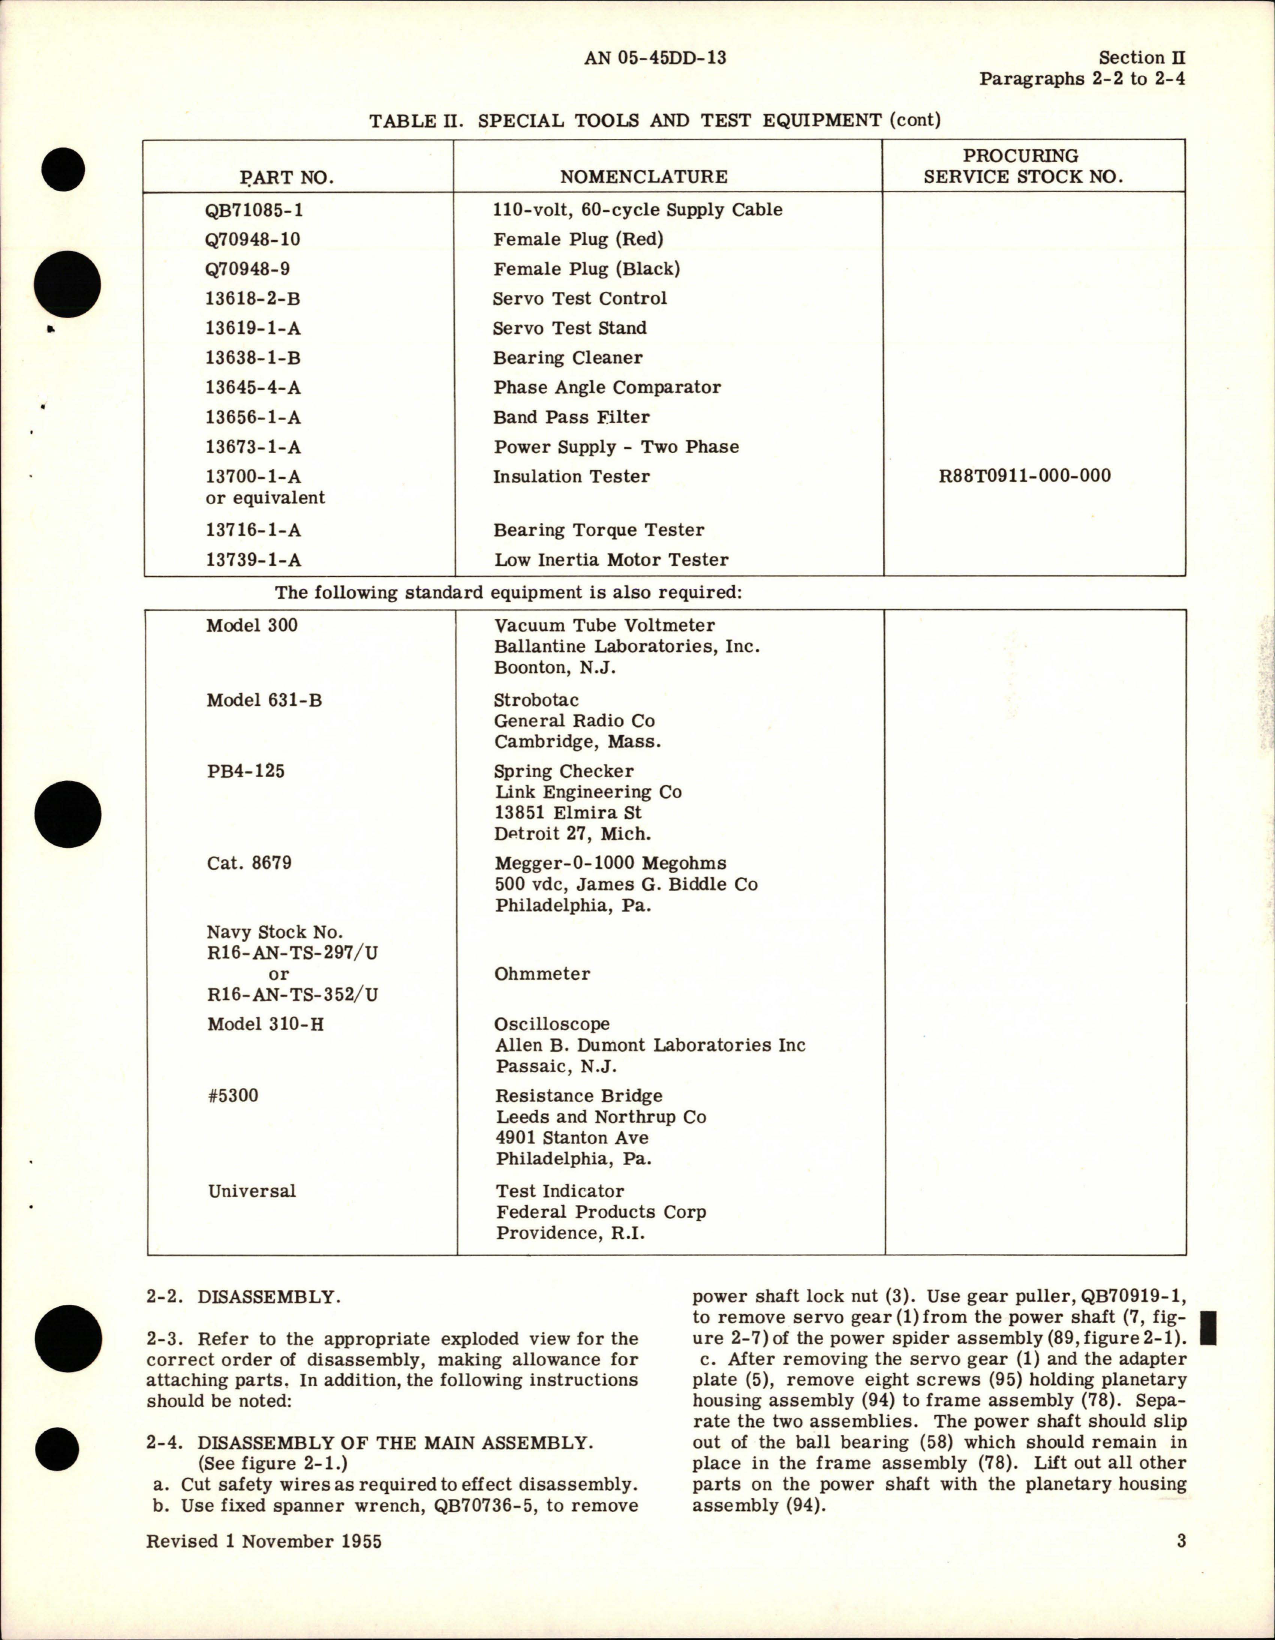 Sample page 5 from AirCorps Library document: Overhaul Instructions for Servo - Part 15601-1-A and 15601-2-A